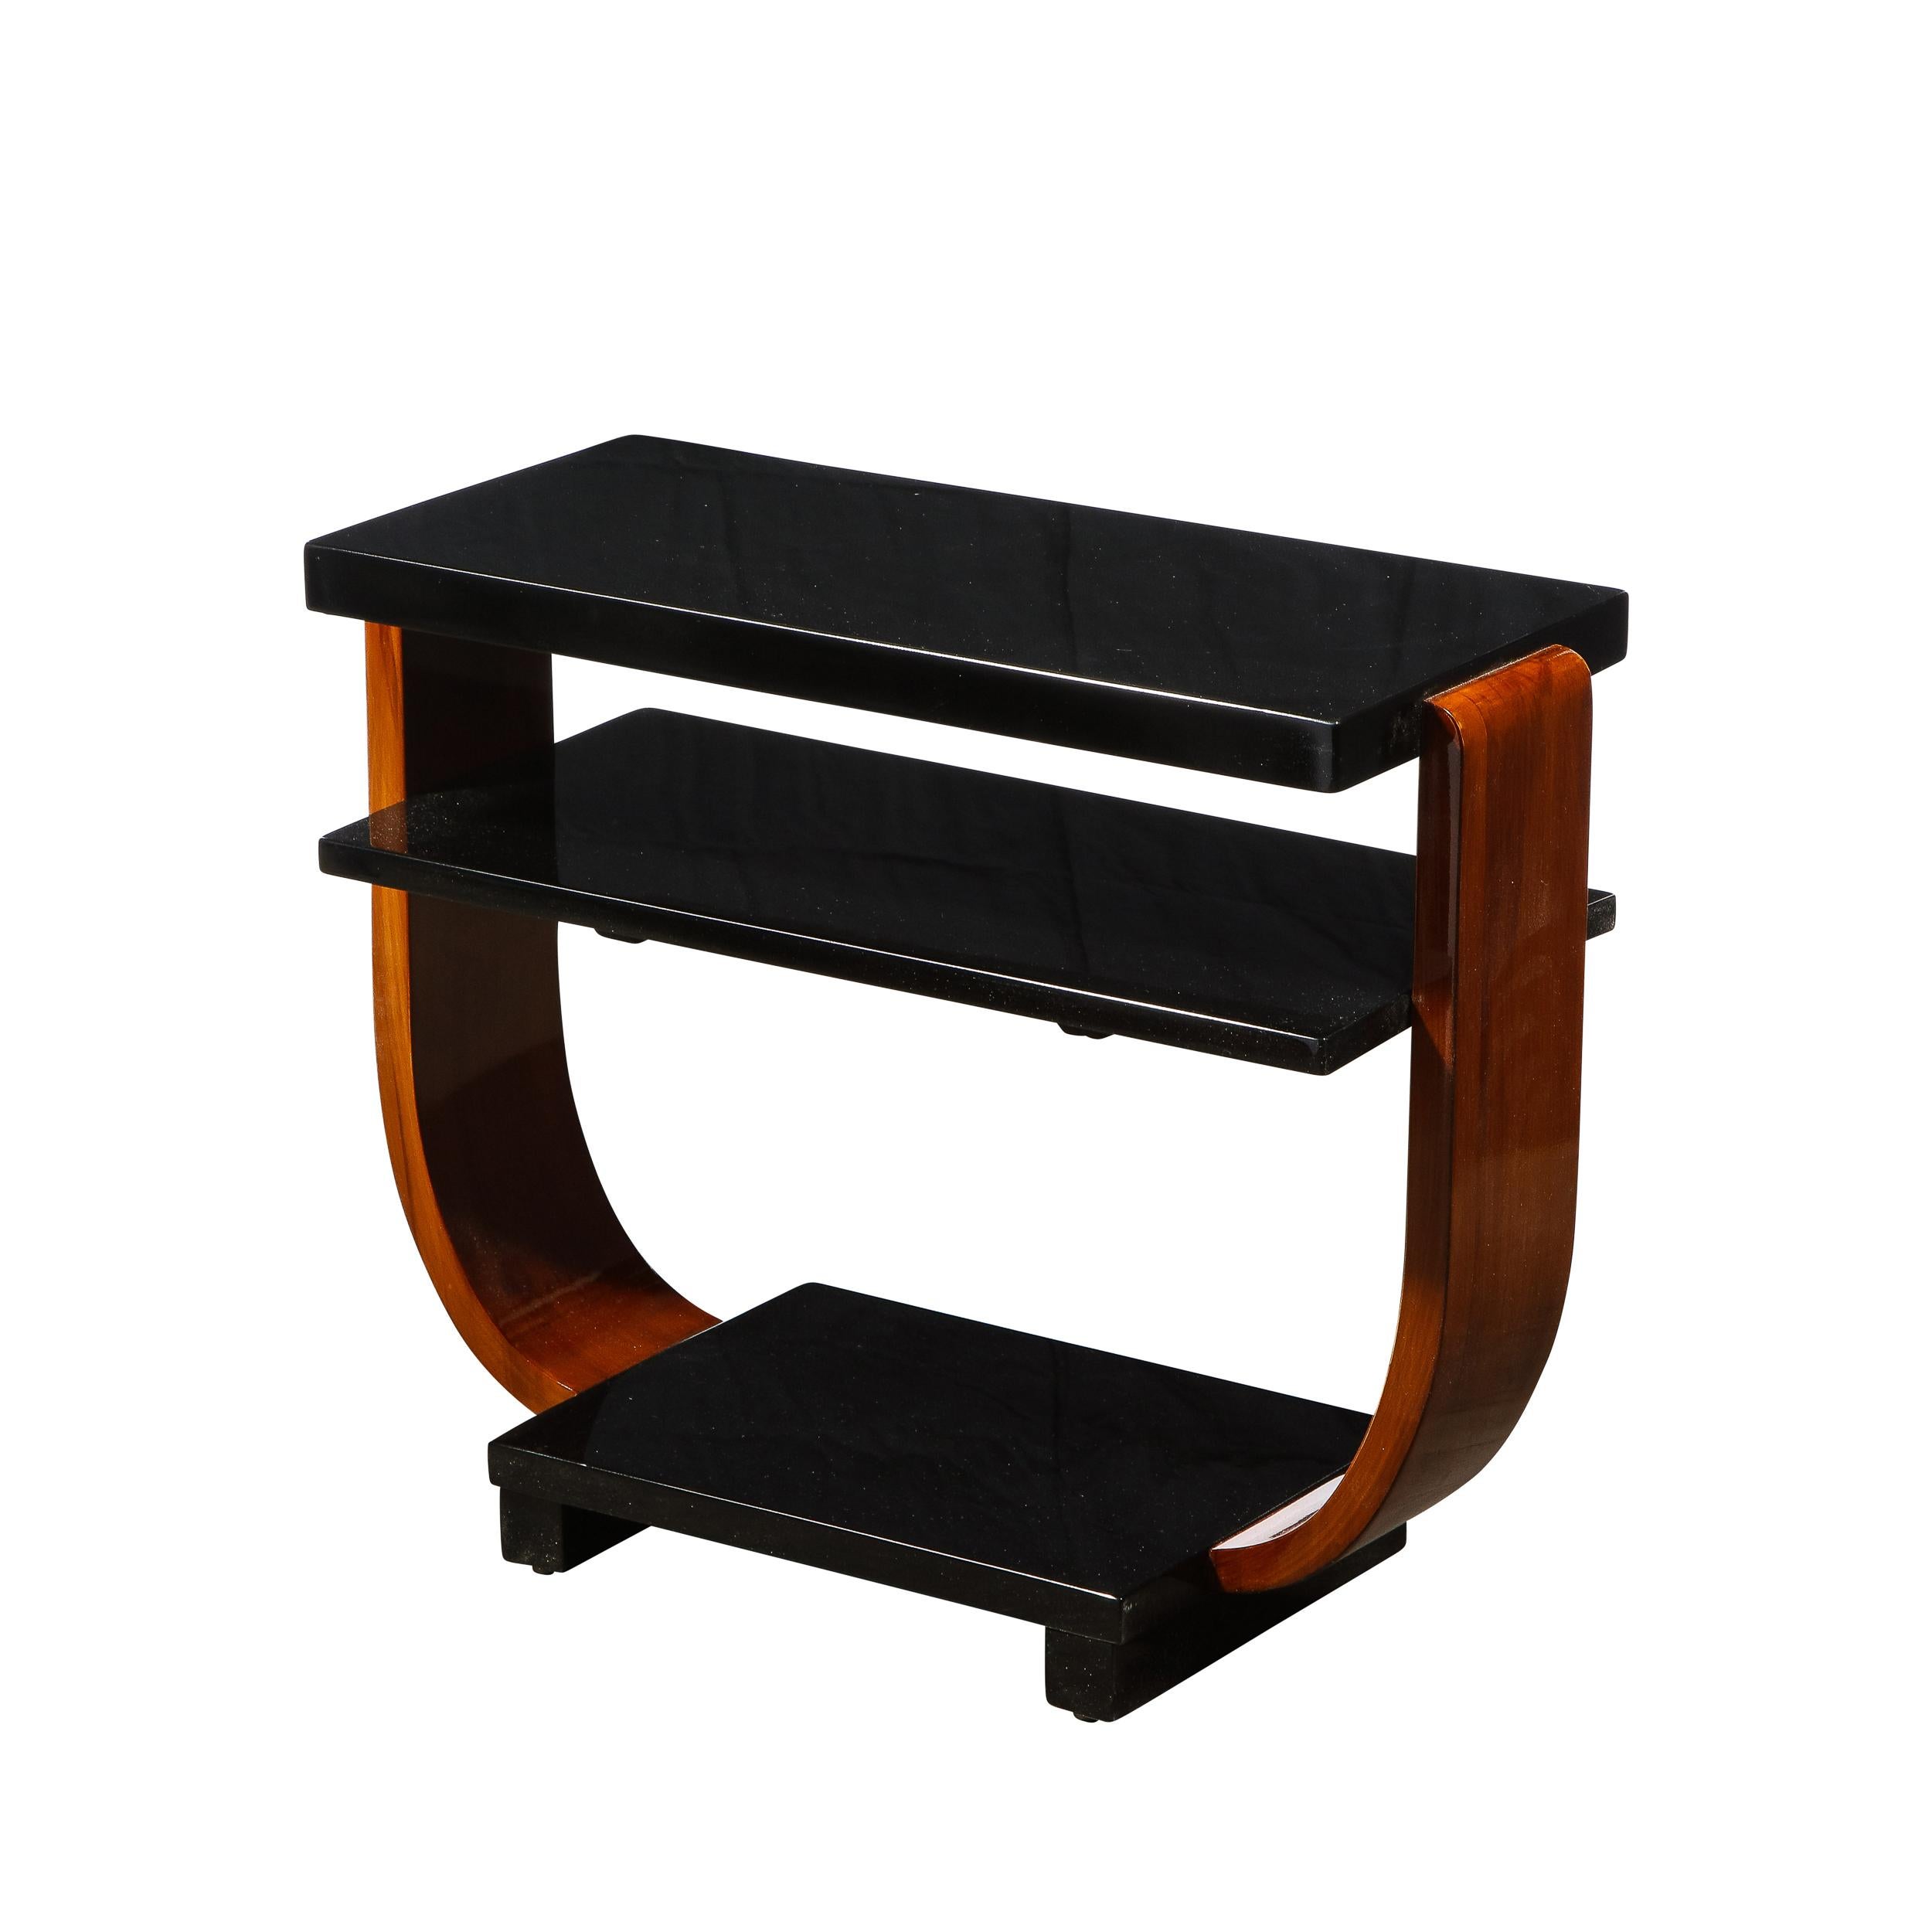 These elegant Art Deco Machine Age side tables was realized in the United States circa 1935. They feature curvilinear walnut legs connected to a black lacquer base which supports the lustrous black lacquer two tier top. With their clean modernist